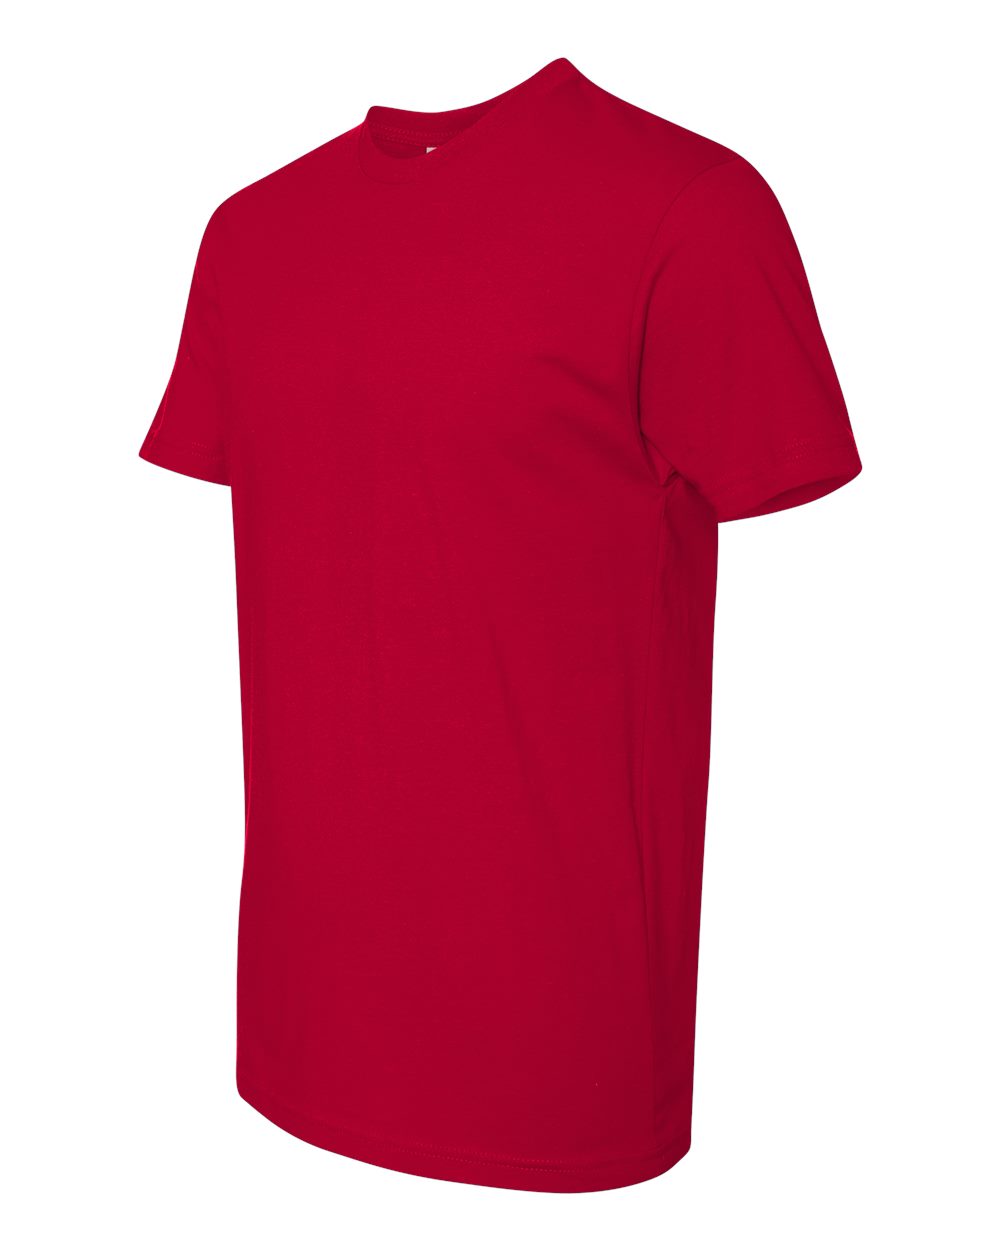 Next Level Apparel - Unisex Tee's 3600 - Red